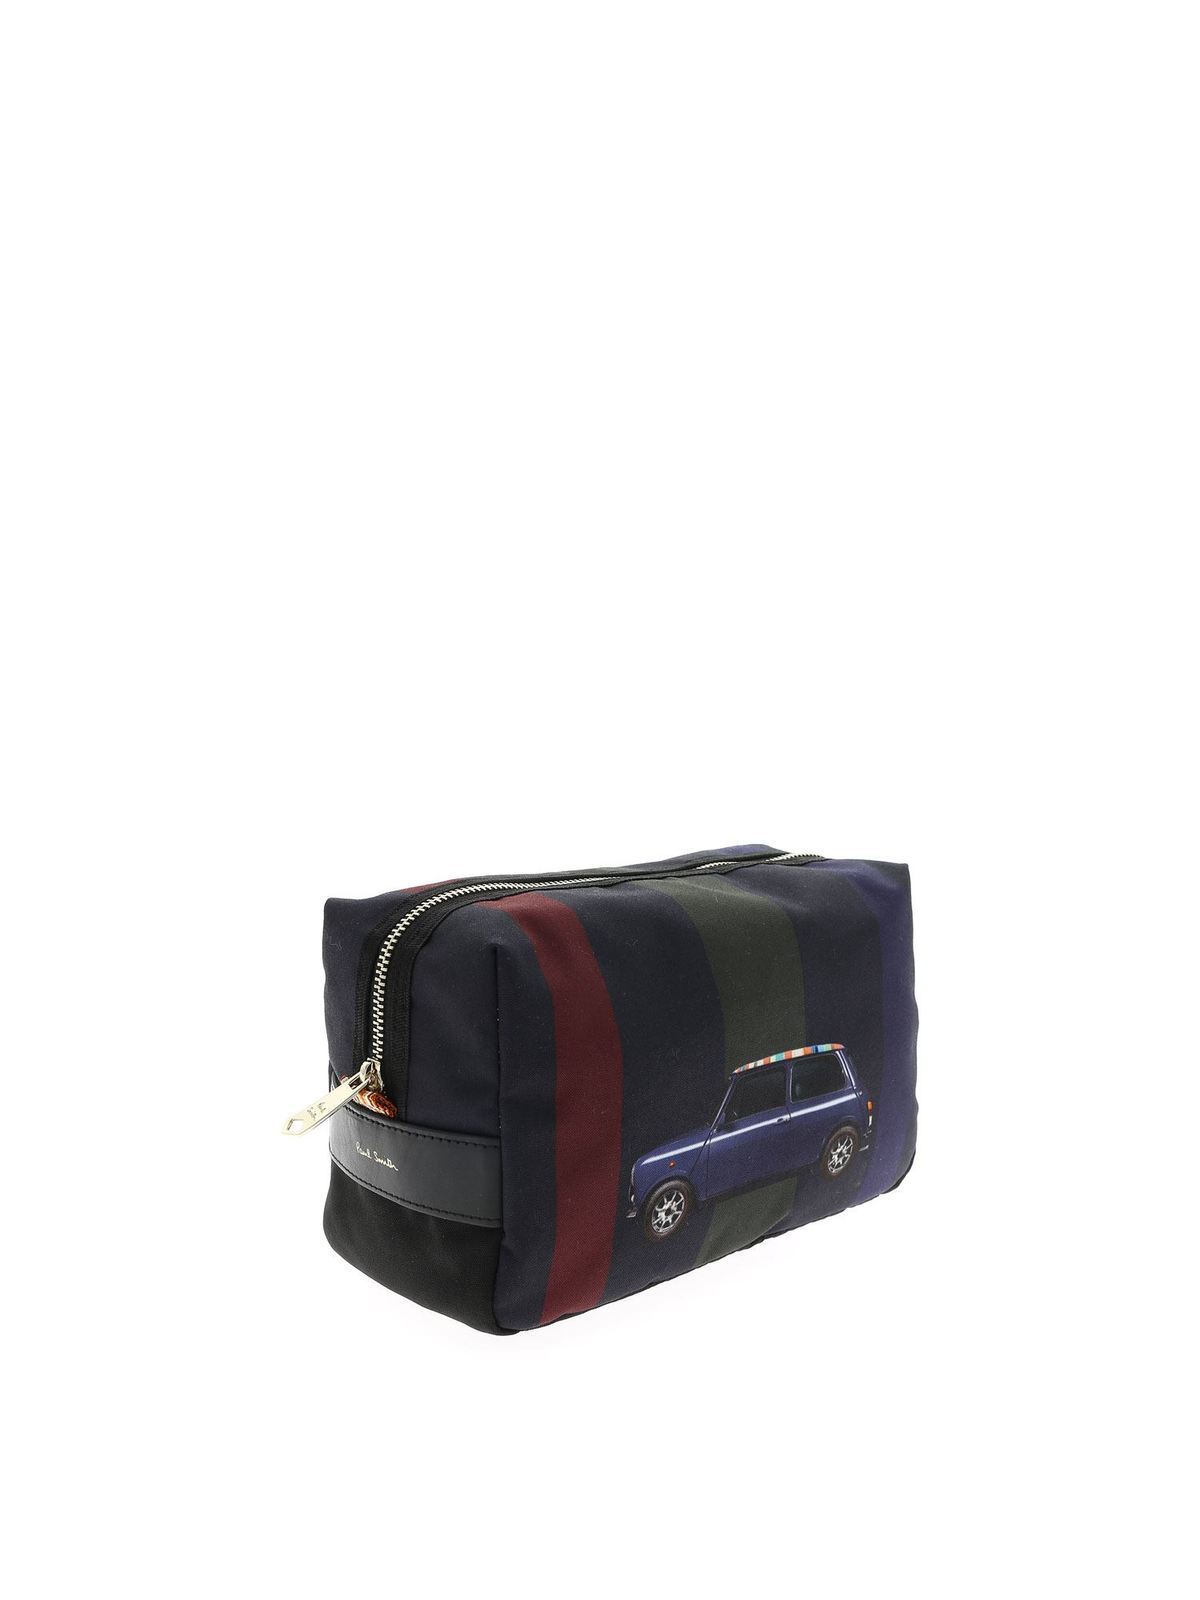 Cases & Covers Paul Smith - Travel case with Mini Stripe print -  M1A5407A4047847